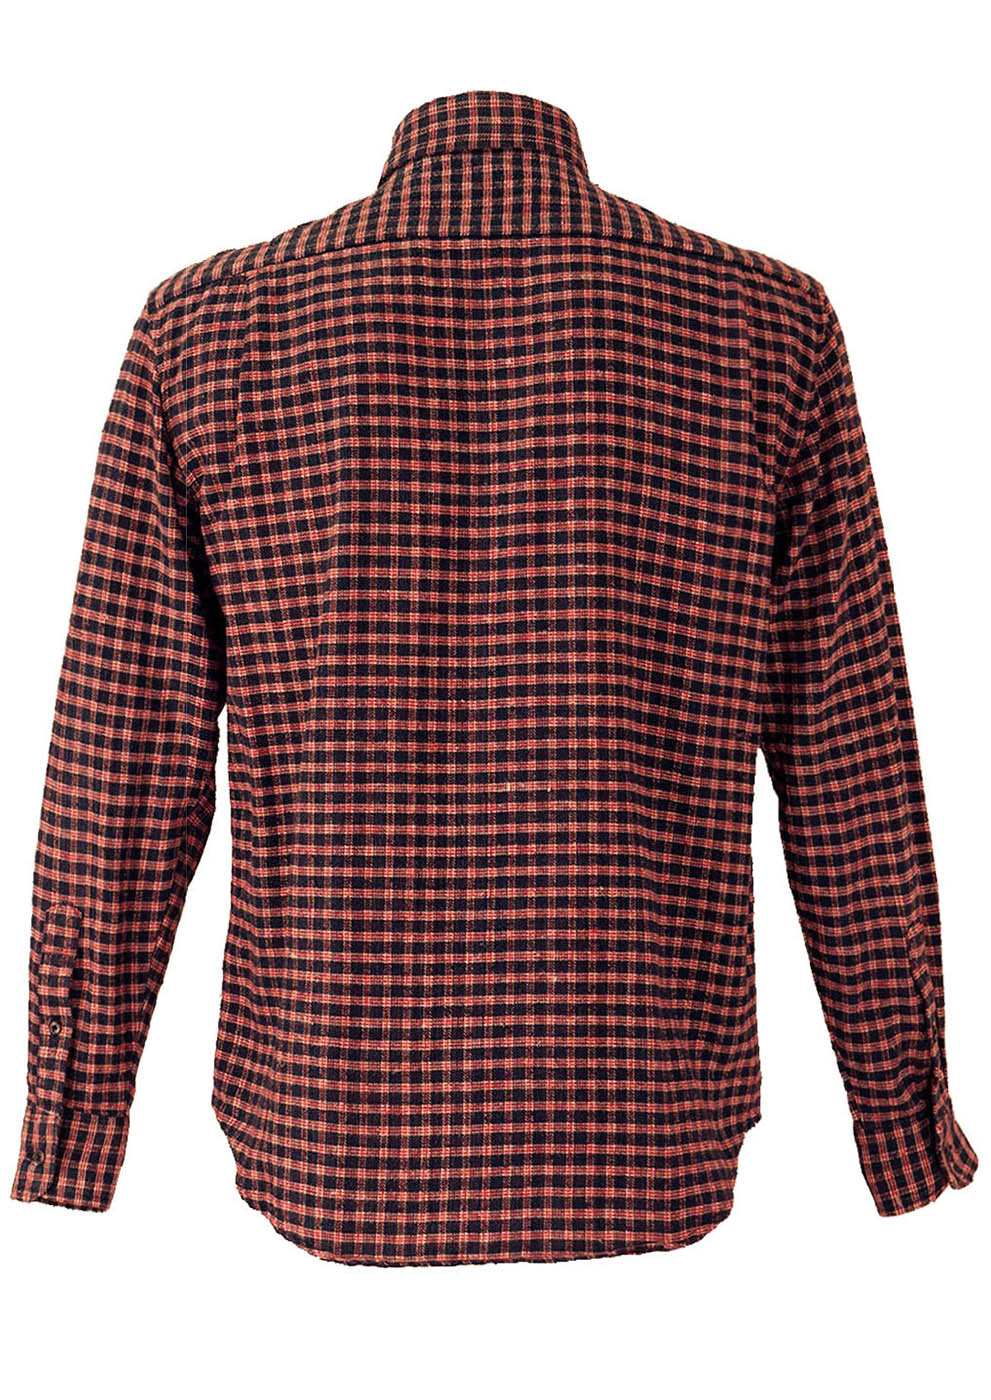 Navy Blue, Red and White Checked Flannel Shirt - M | Reign Vintage